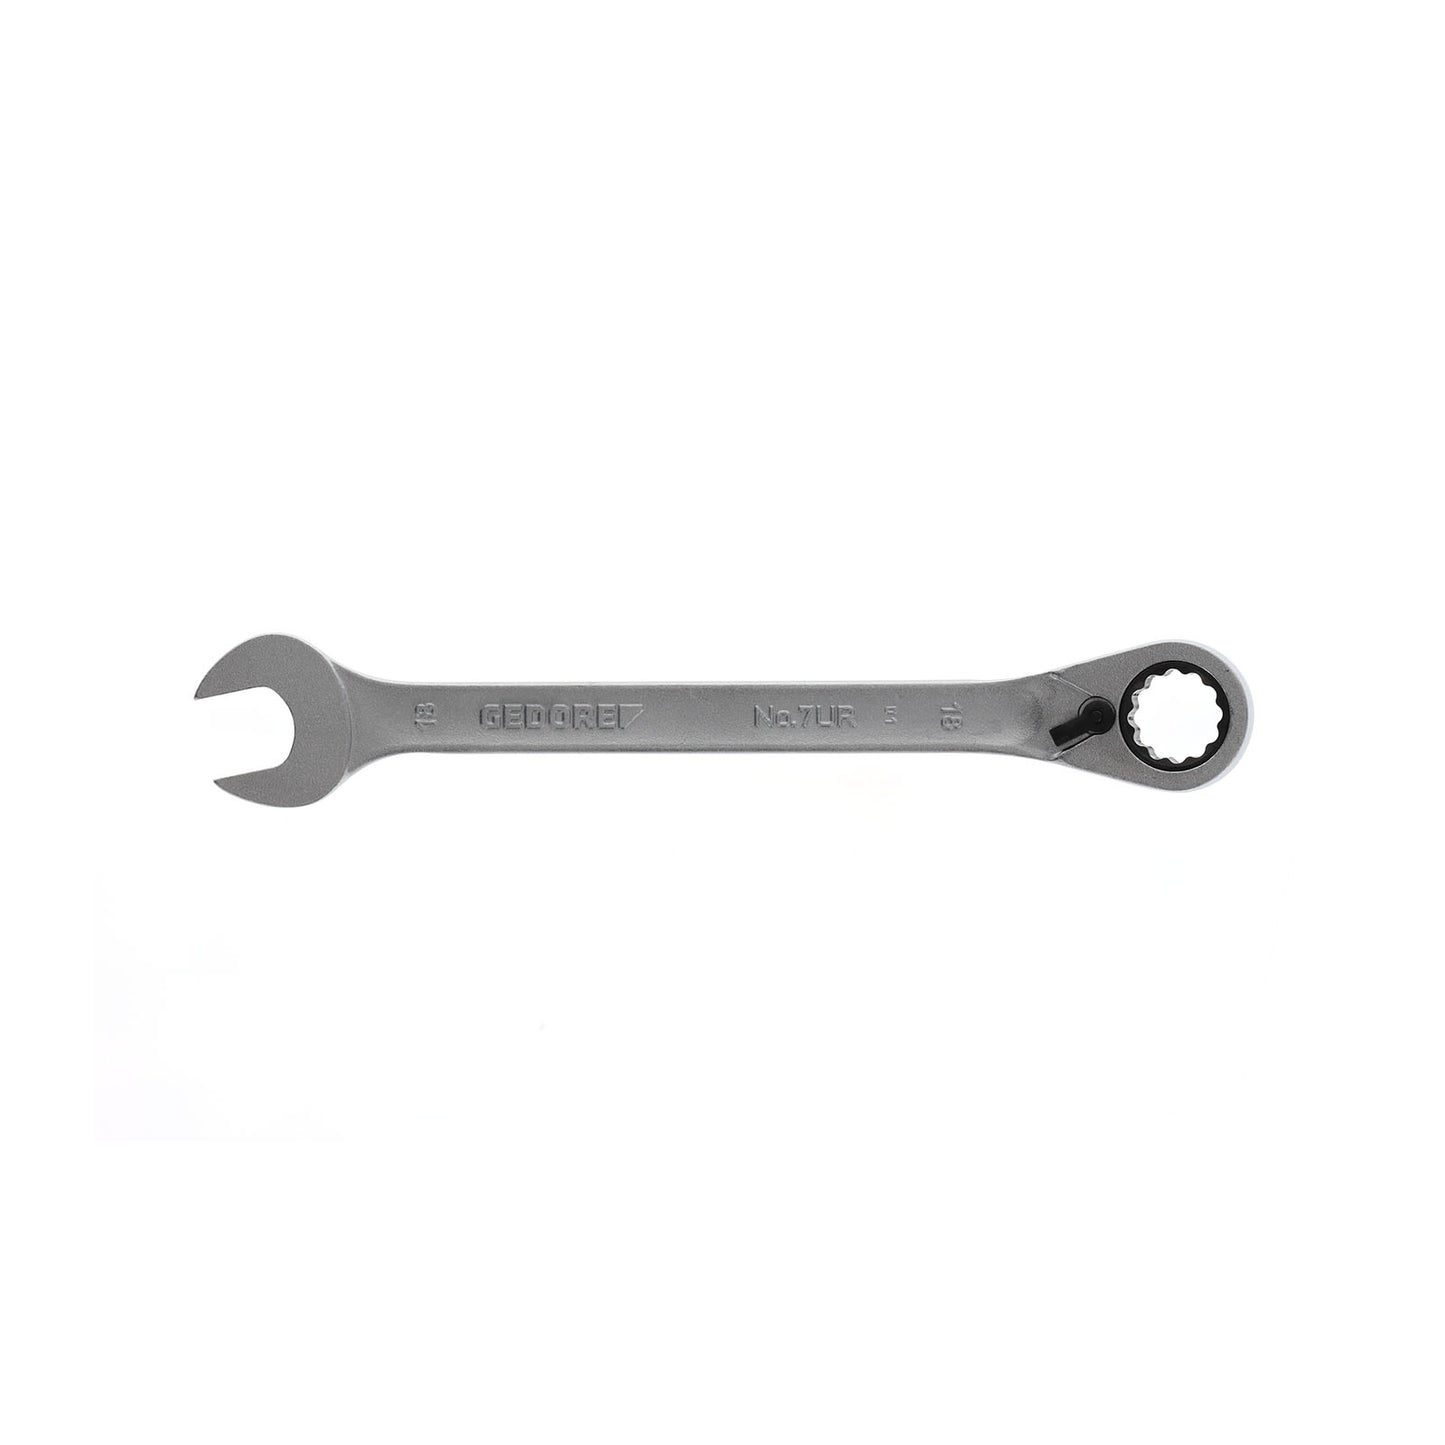 GEDORE 7 UR 18 - Ratchet combination wrench, 18mm (2297353)